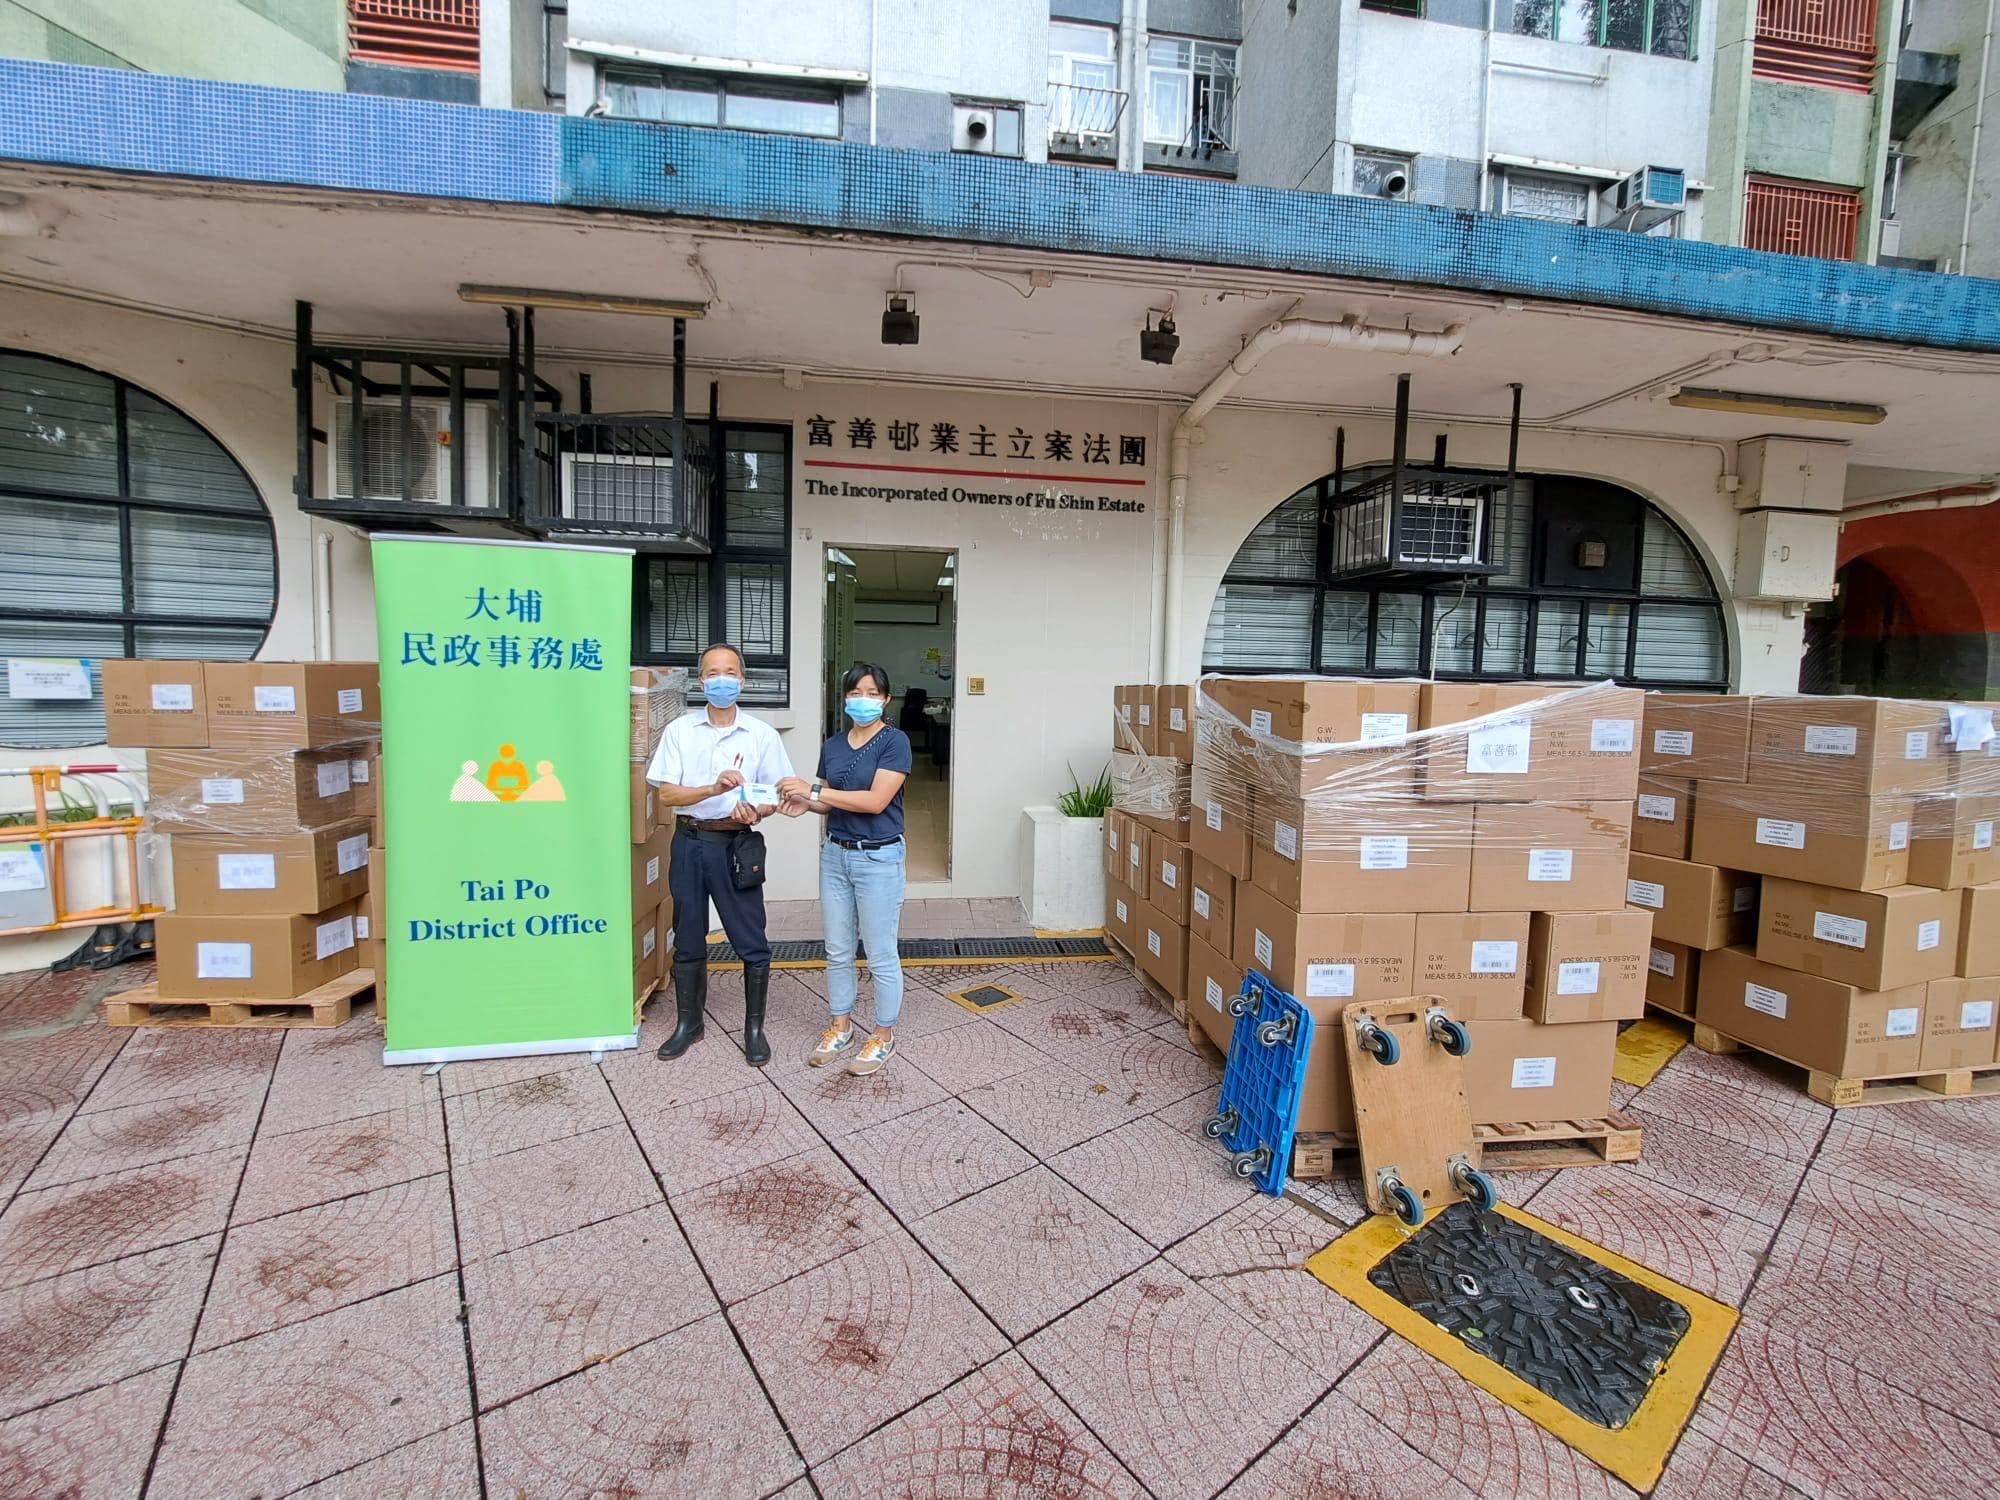 The Tai Po District Office today (June 7) distributed COVID-19 rapid test kits to households, cleansing workers and property management staff living and working in Fu Shin Estate for voluntary testing through the owners' corporation.